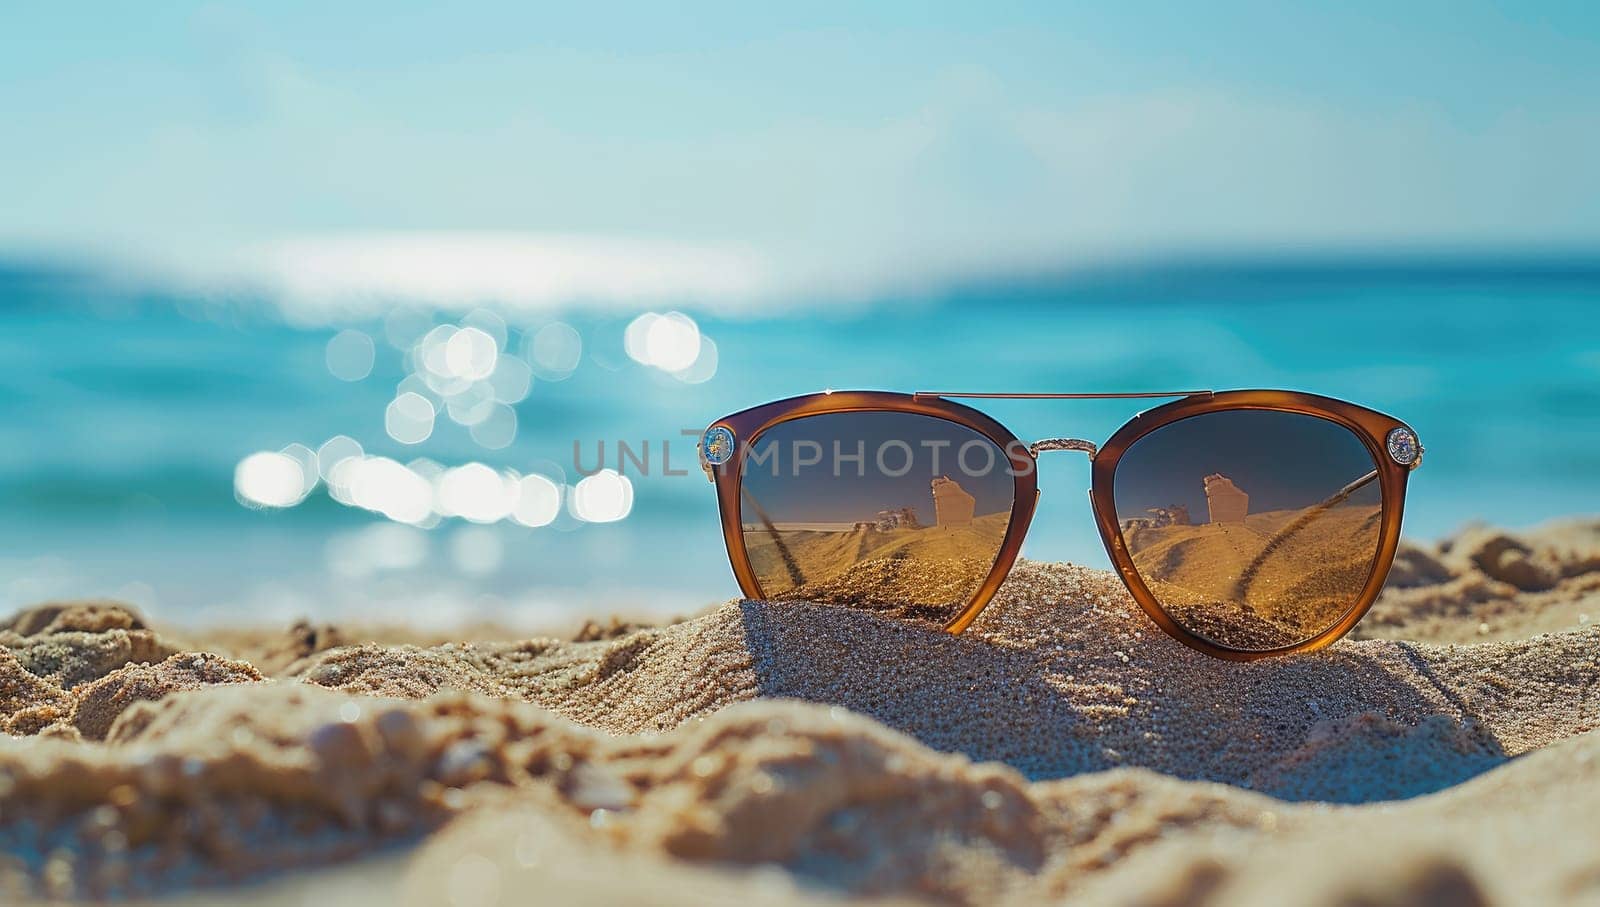 Sunglasses resting on sandy beach with ocean backdrop